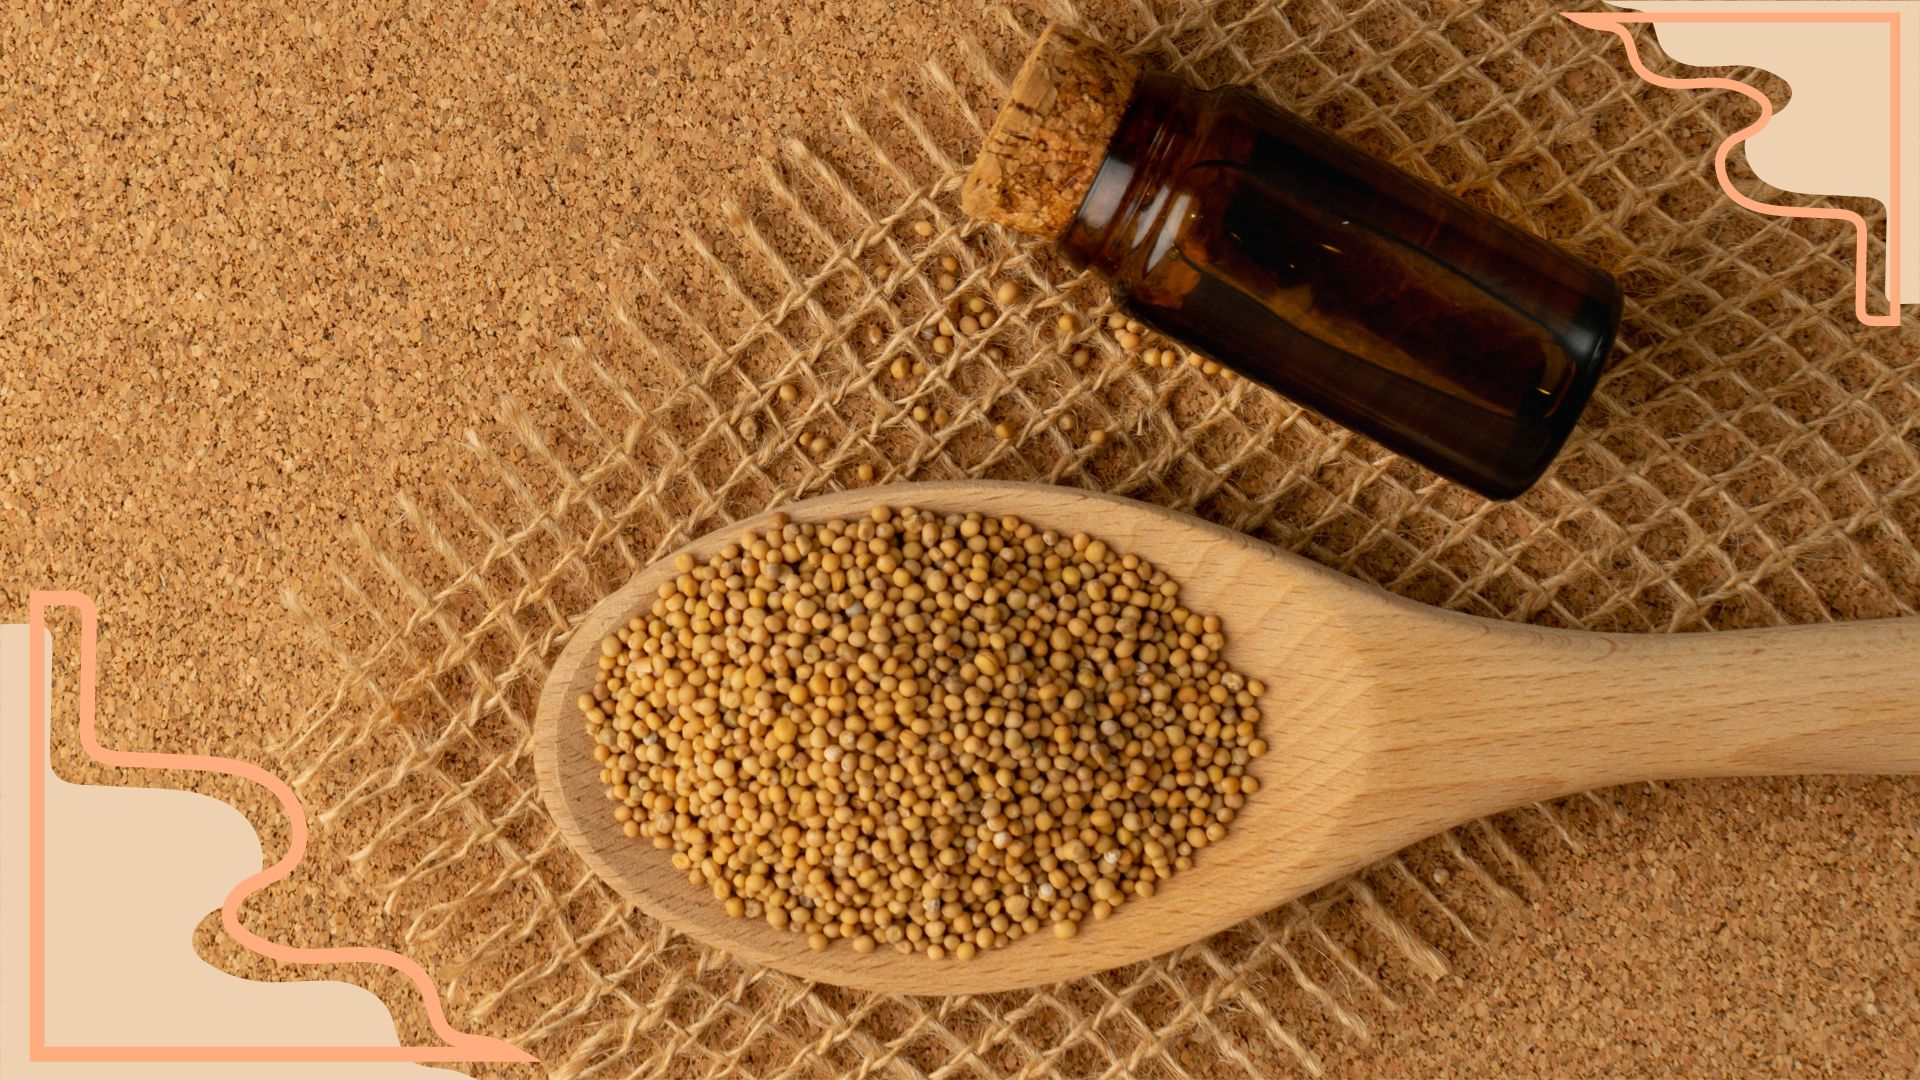 Mustard Oil For Hair: Benefits, Uses And Side Effects | Woman & Home